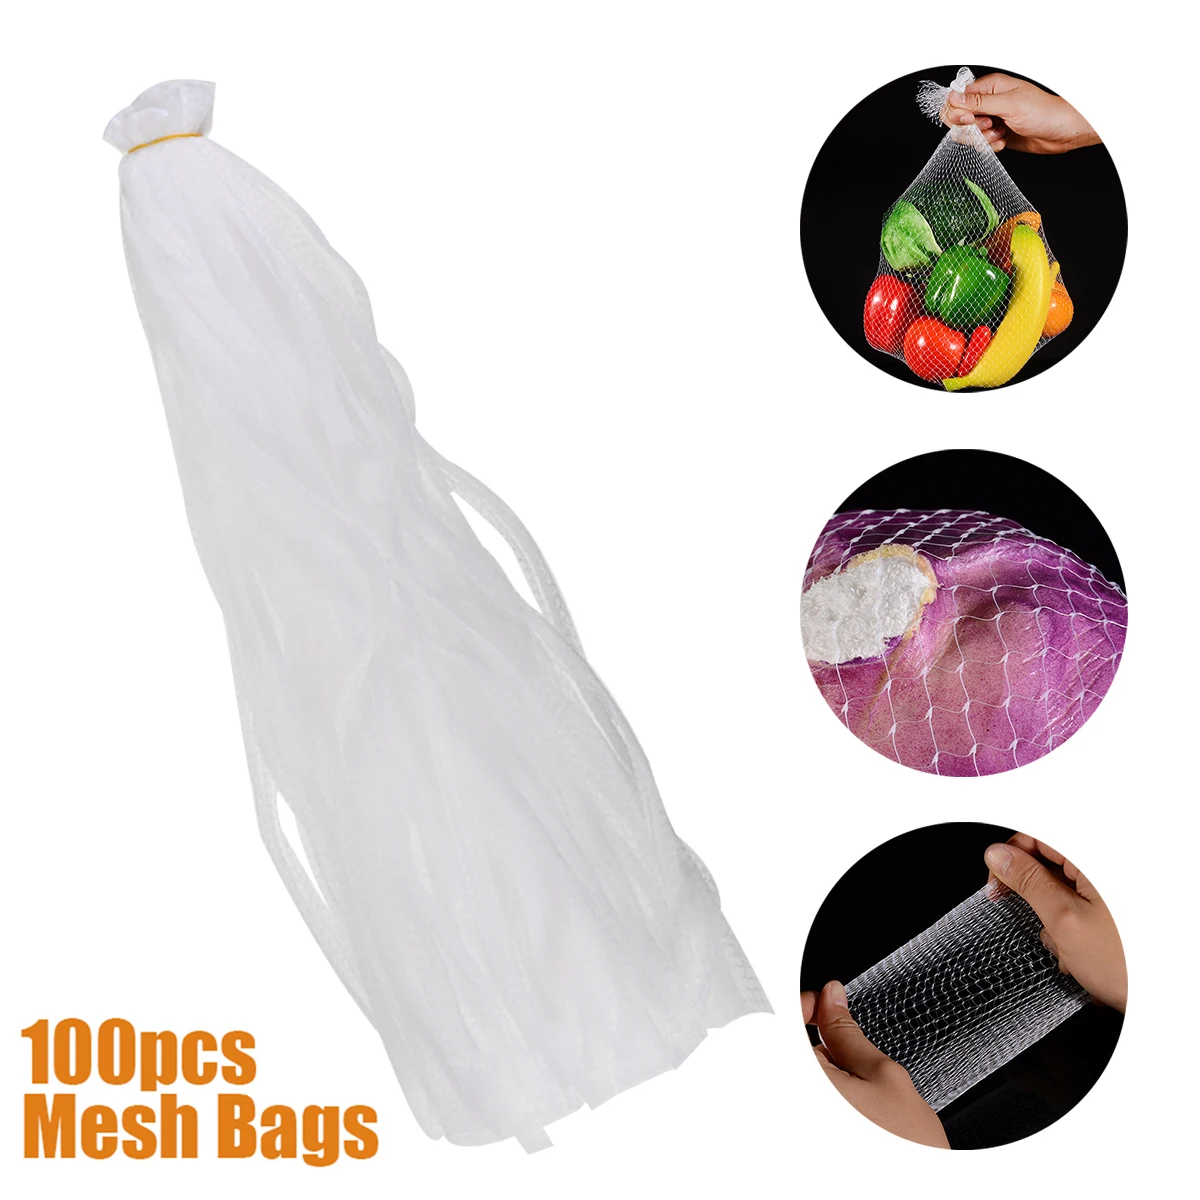 

100pieces Kitchen Fruits Vegetables Storage Mesh Bags Reusable Hanging Bag Grocery Produce Bags Mesh Shopping Tote Bag 60cm